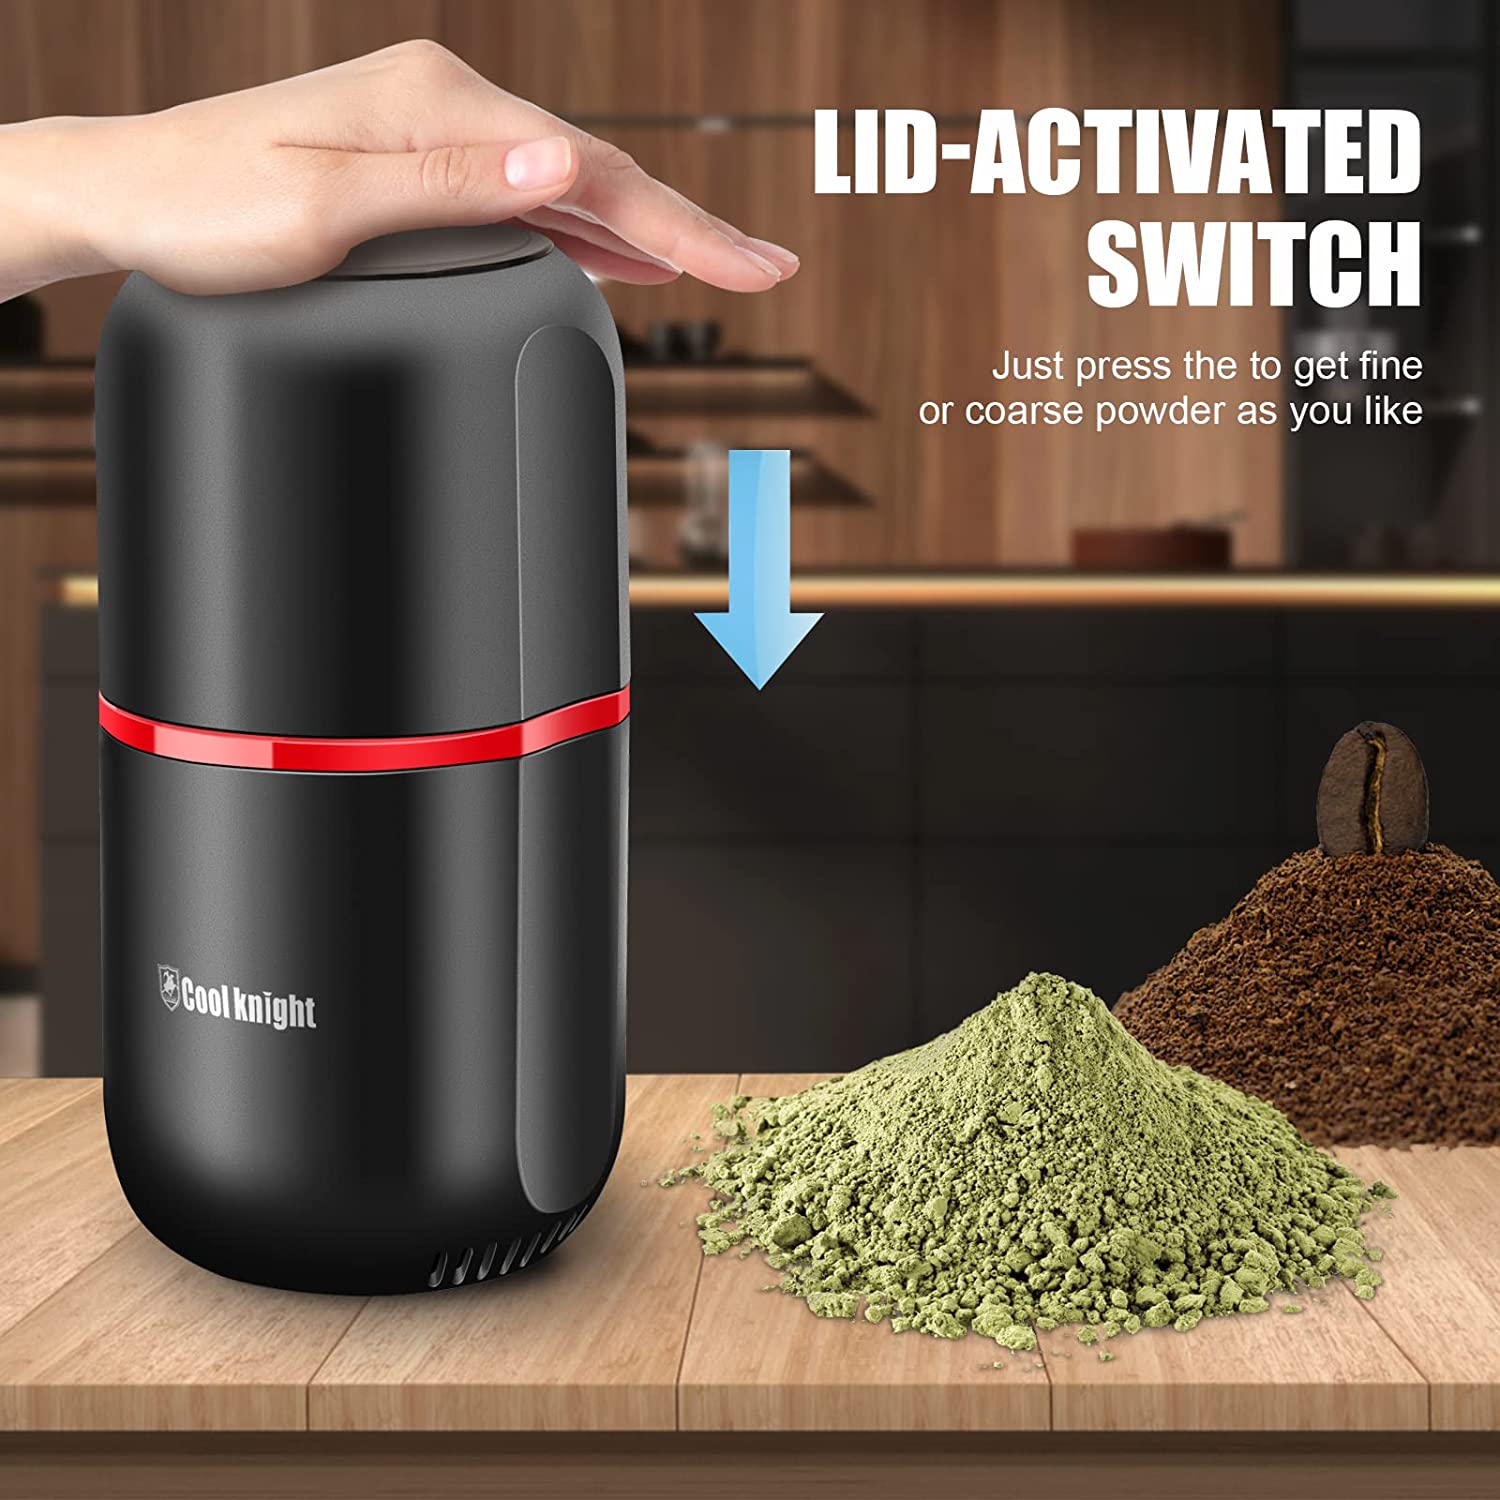 Cool Knight Large Electric Herb Grinder – Discreet Smoker